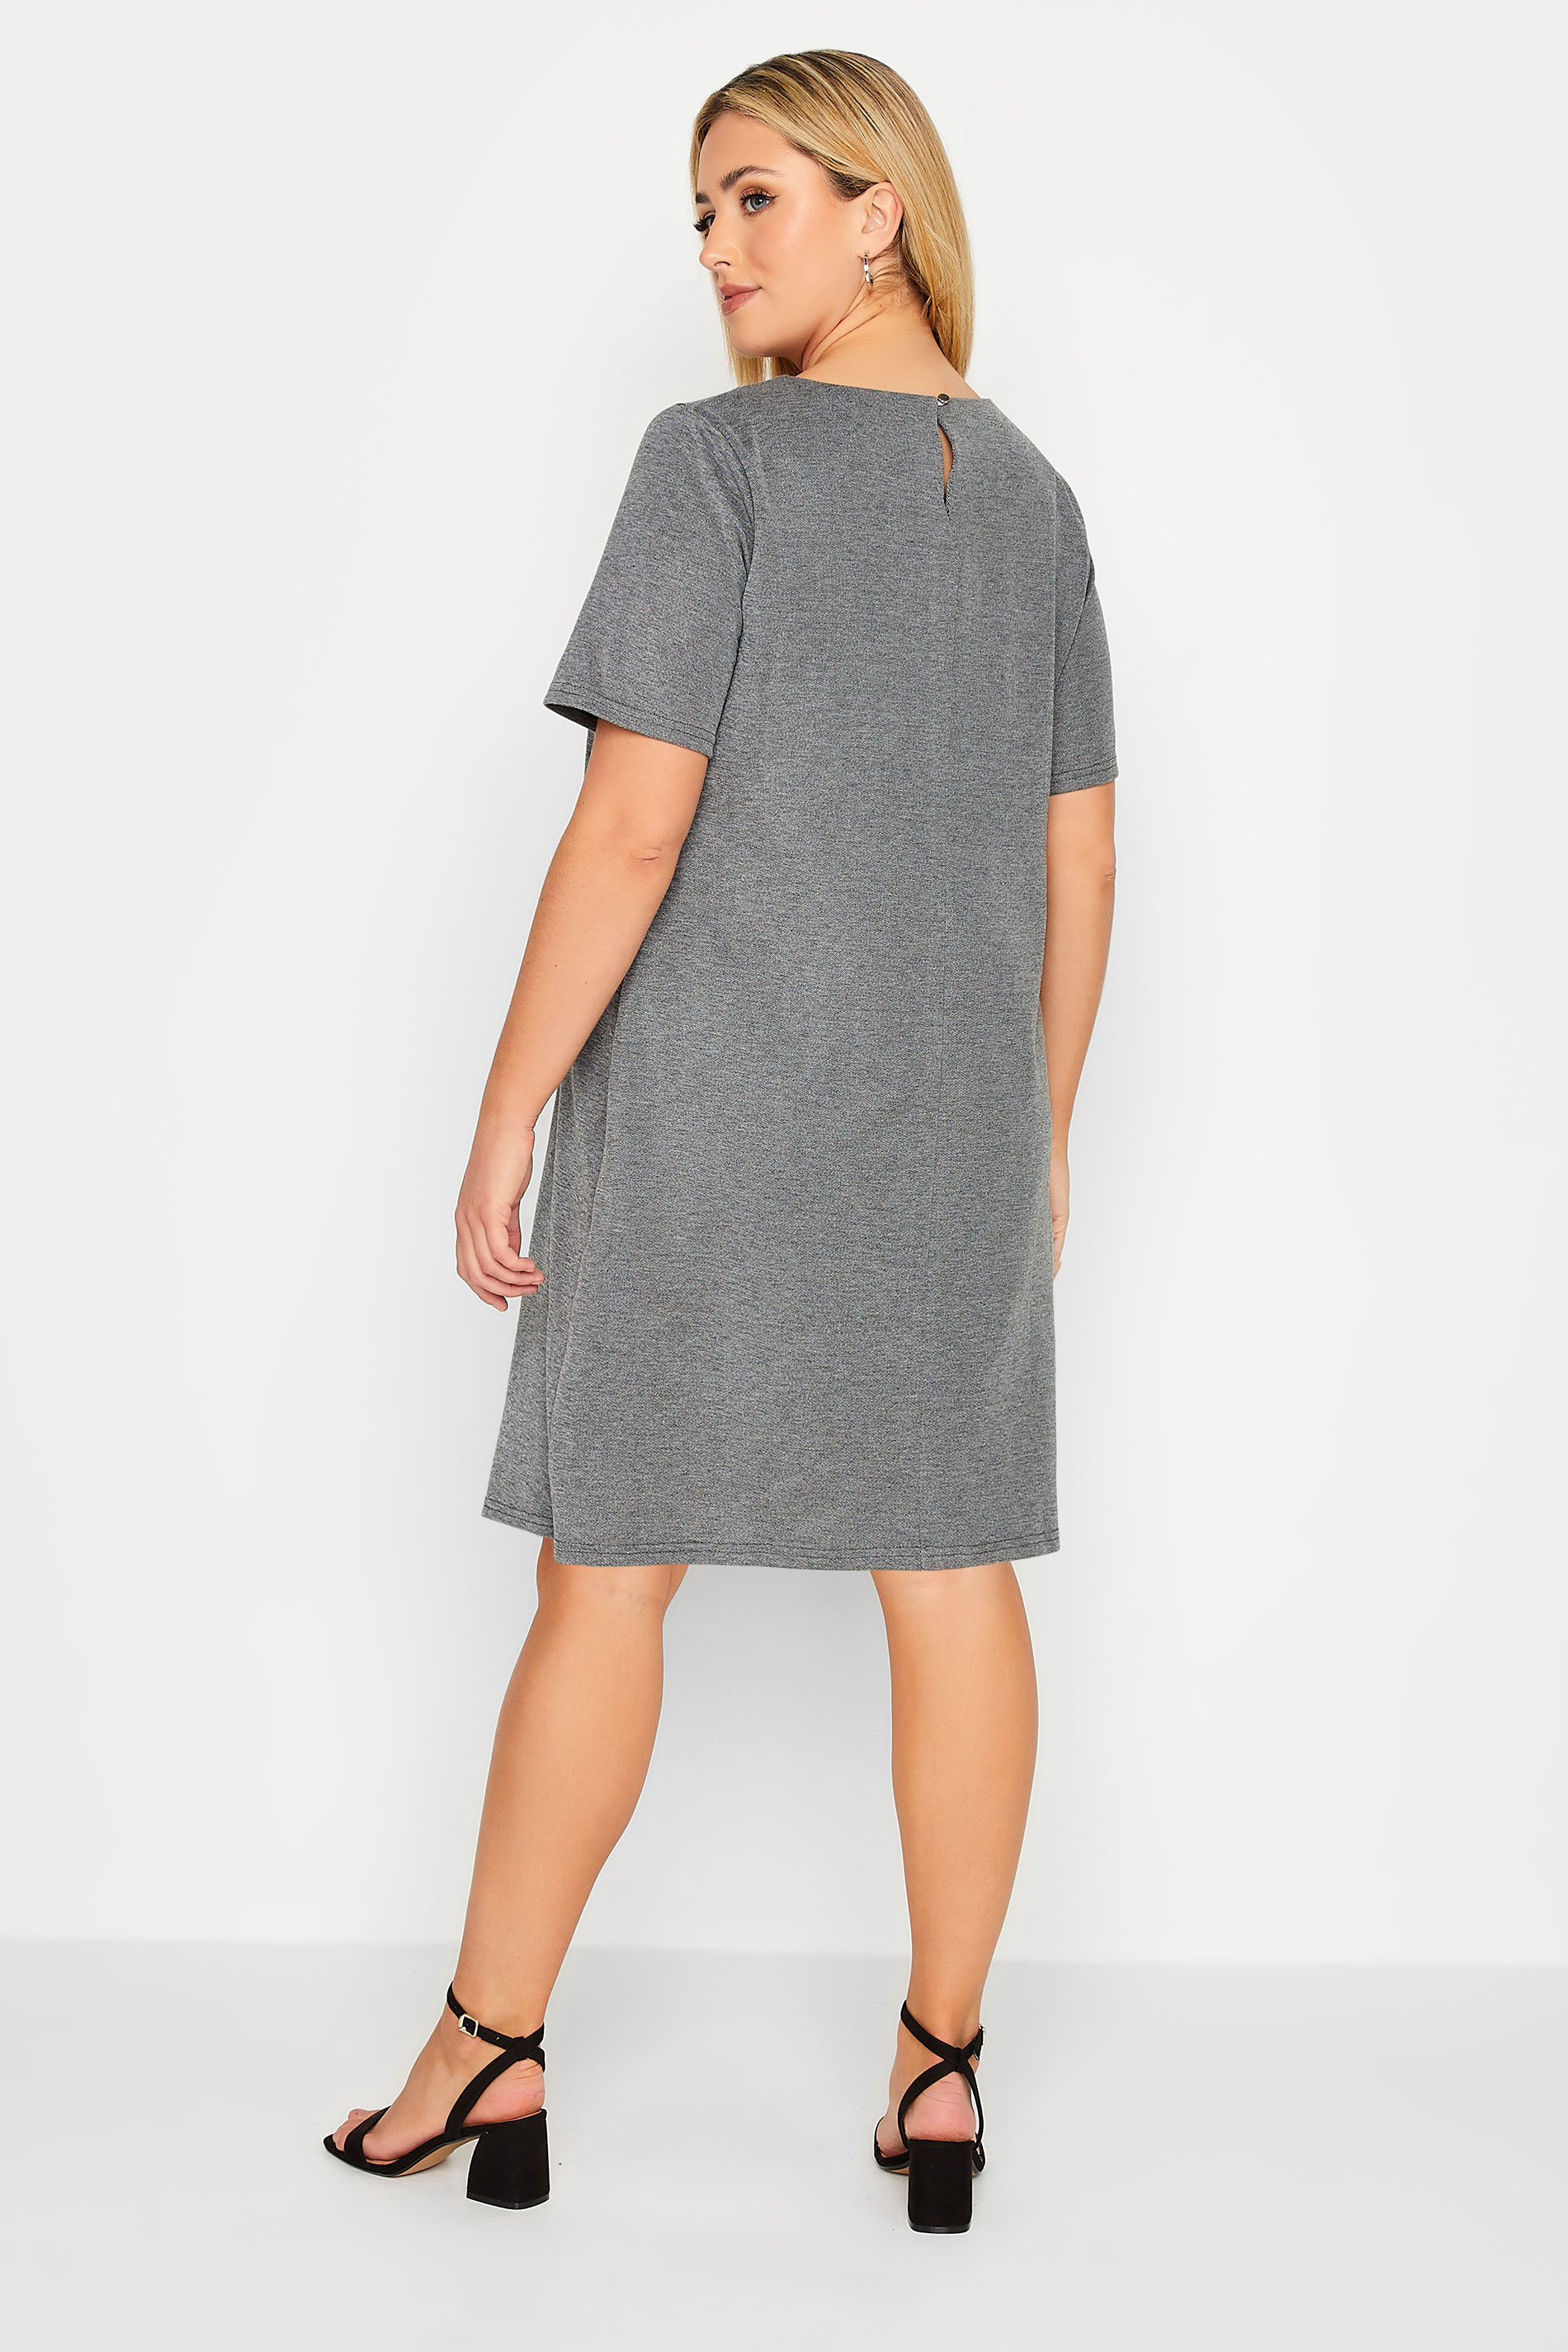 Plus Size Grey Knitted Pocket Dress | Yours Clothing 3